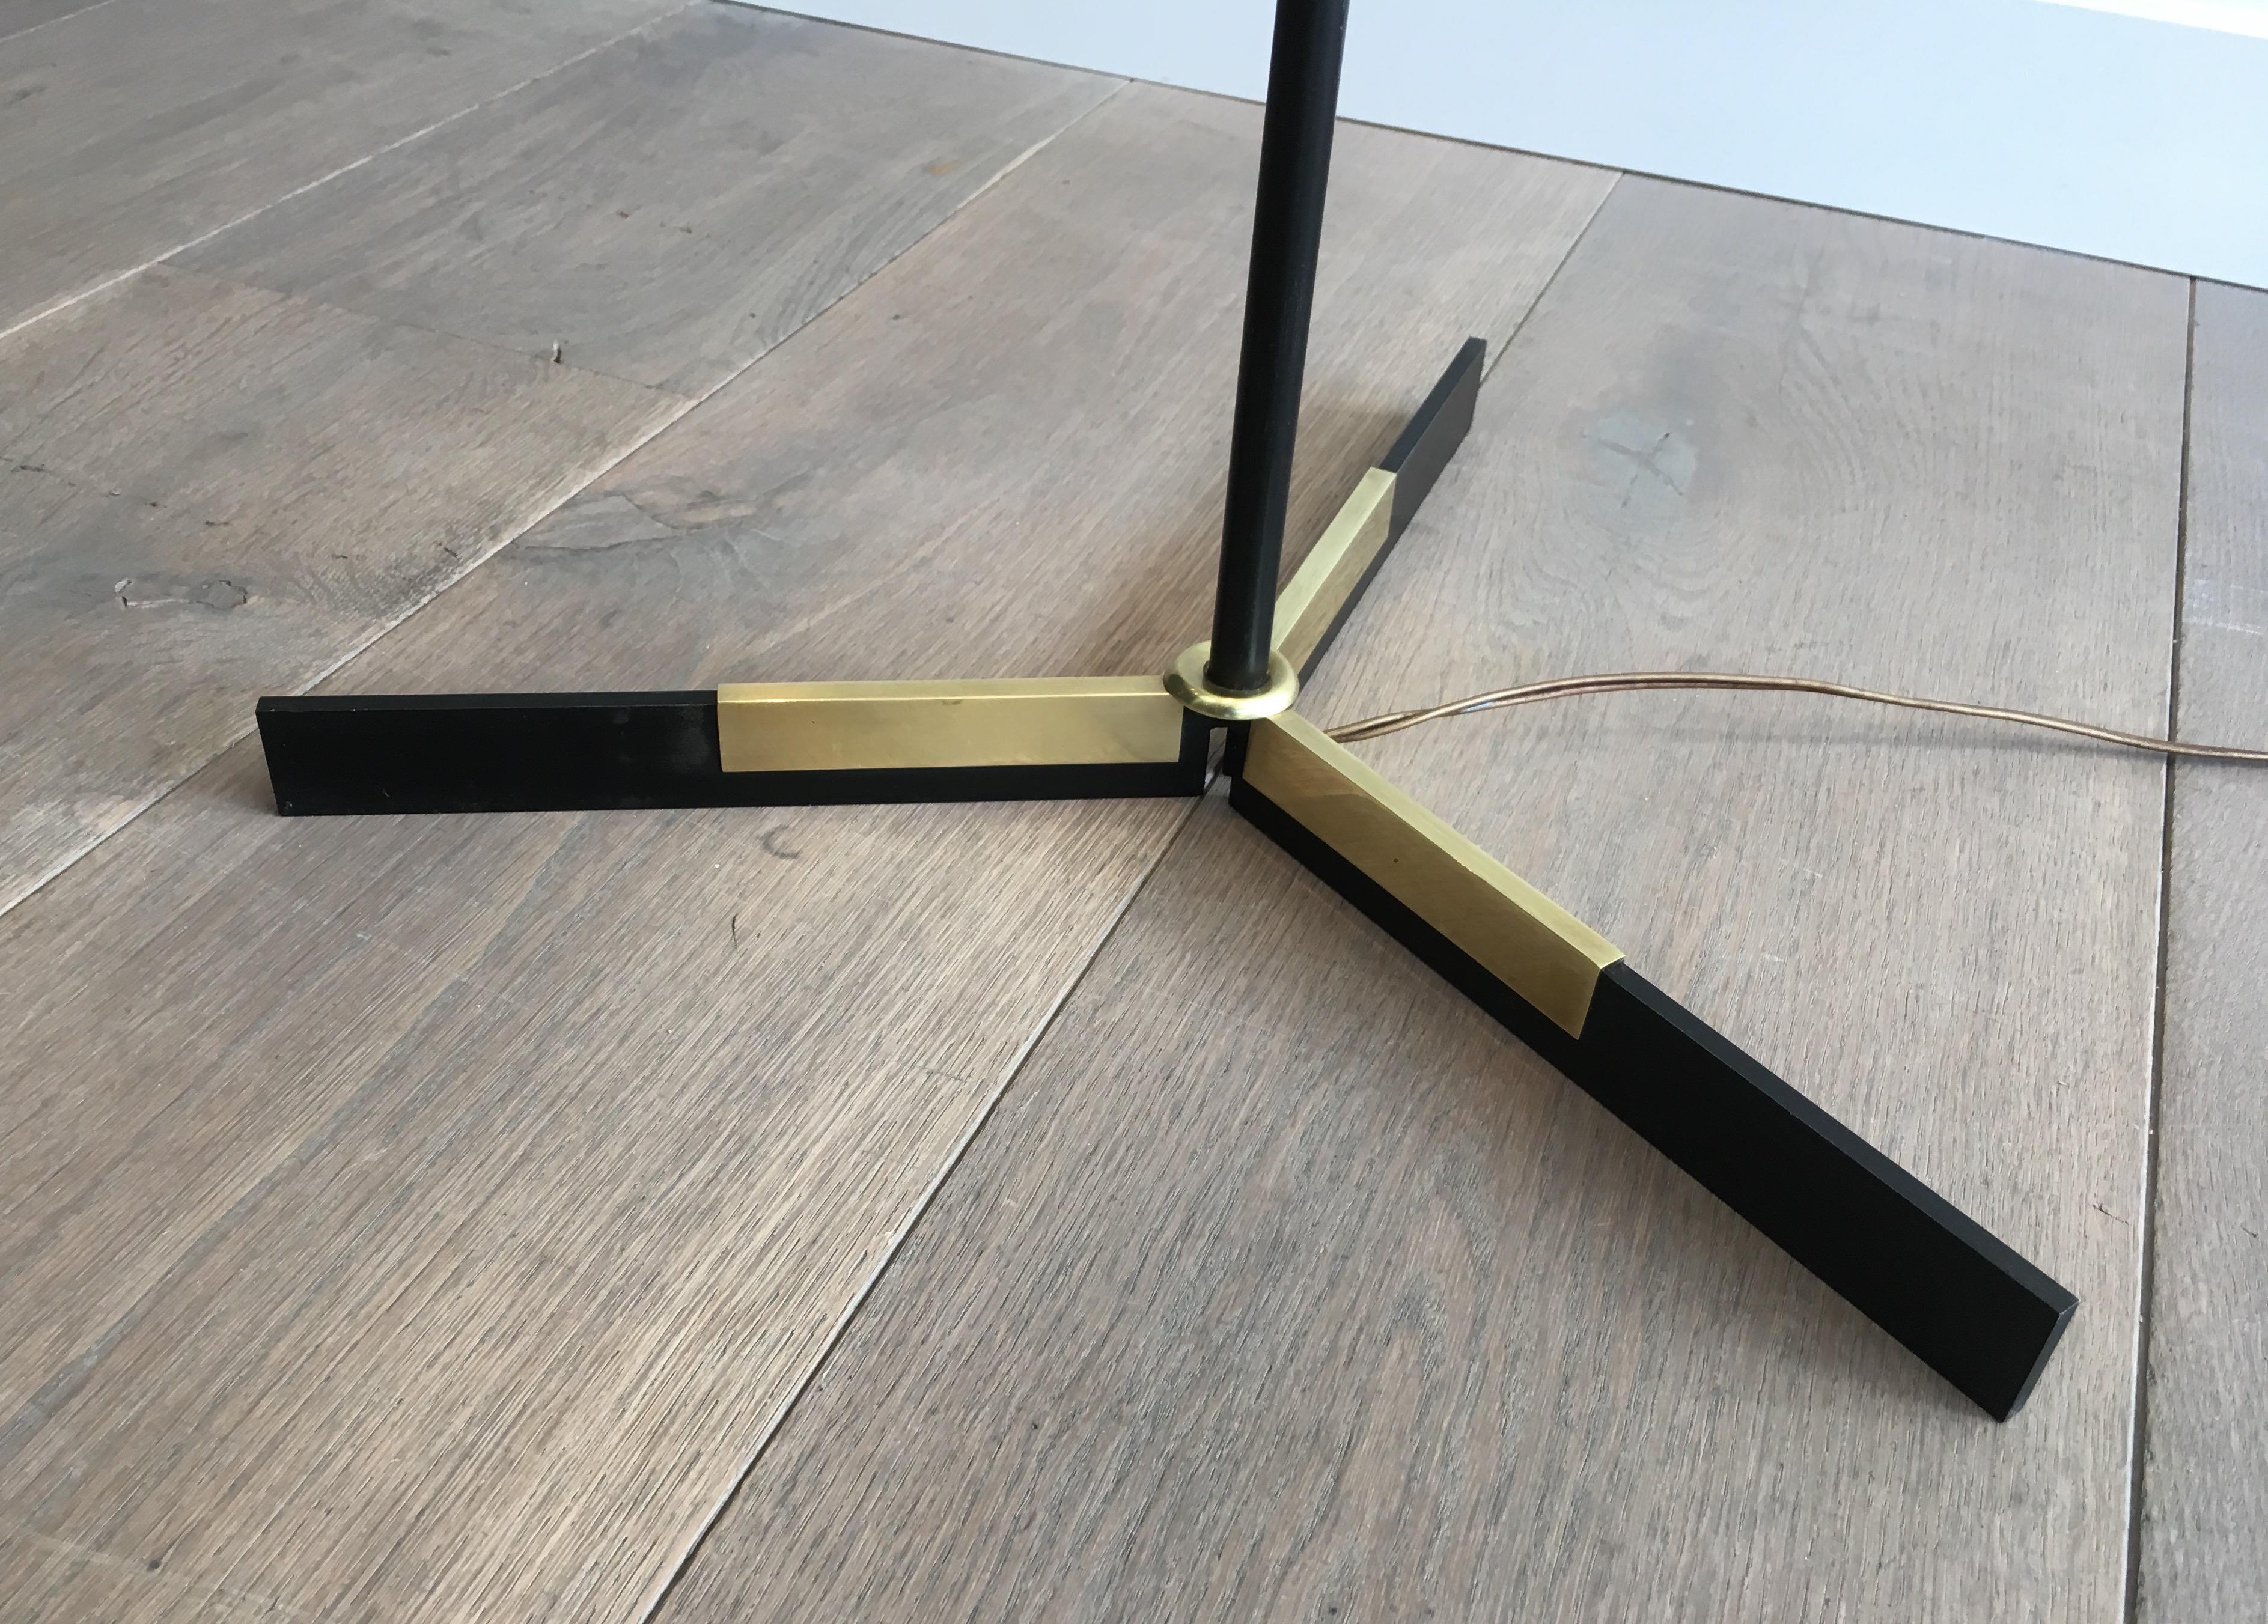 Black Lacquered and Brass Design Floor Lamp, French, circa 1950 For Sale 2